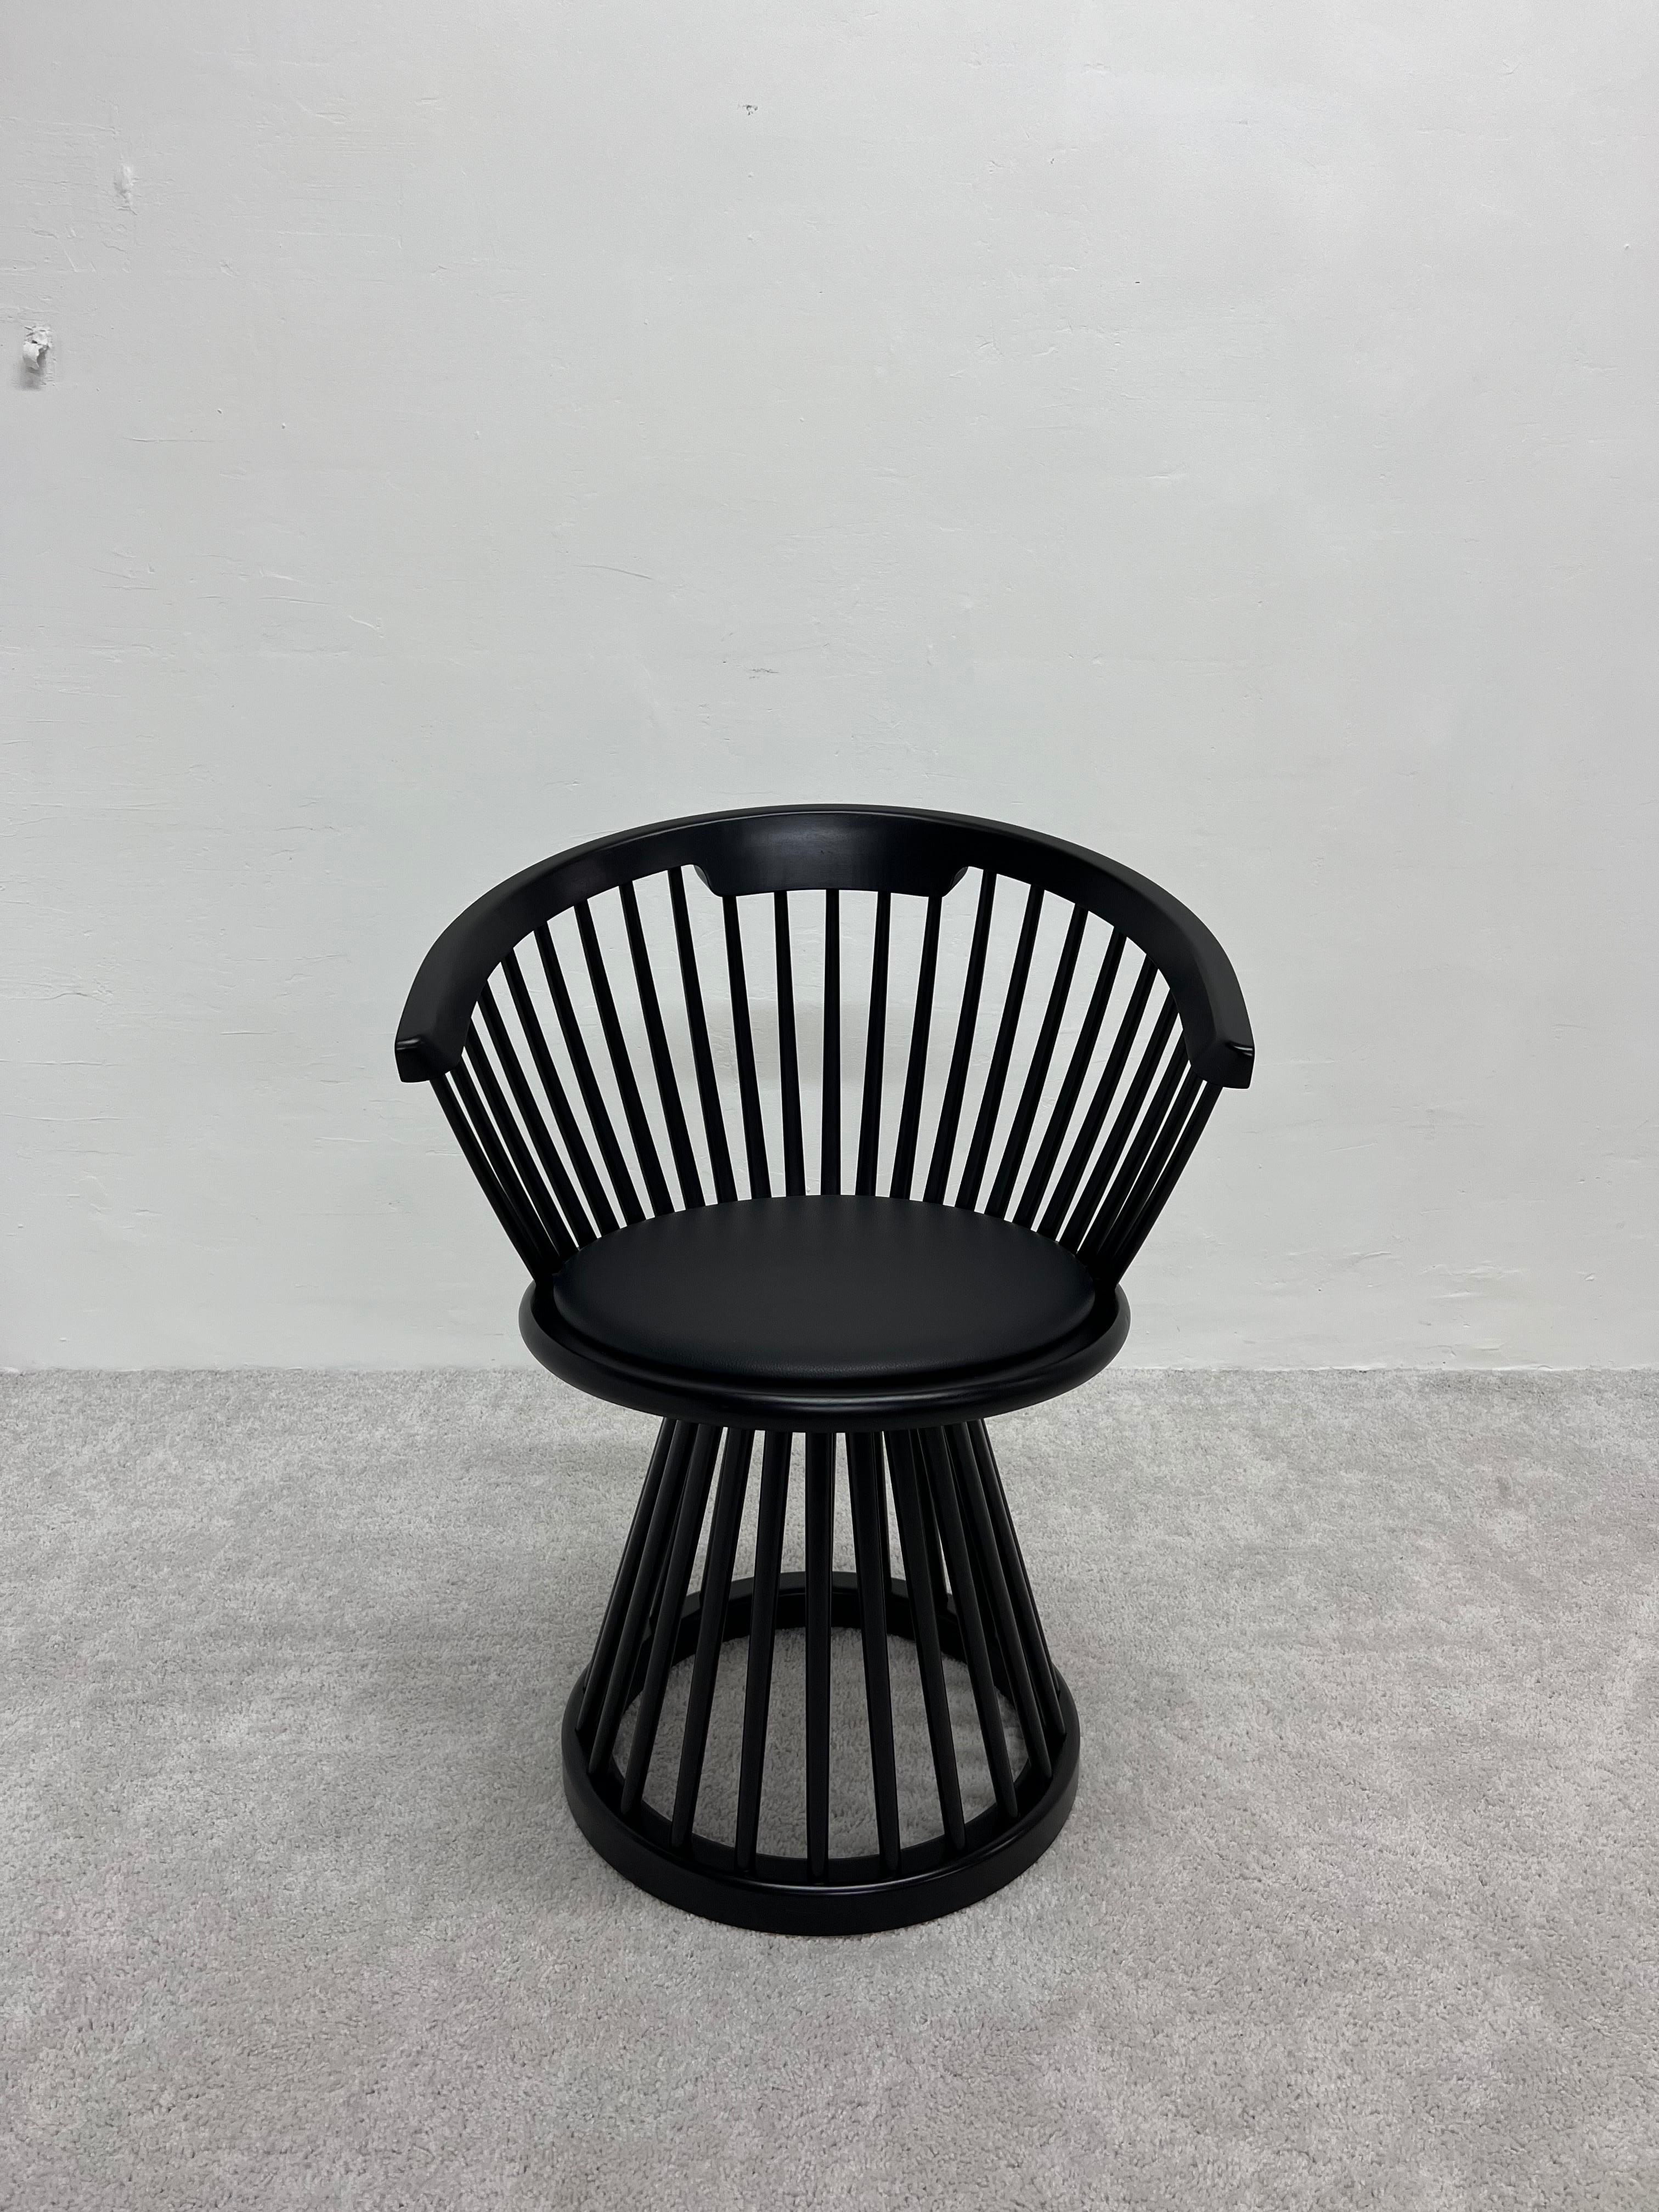 Black stained birch Fan dining chair with a splayed array of machined wood spindles, curved wood back and round base with black leather seat pad. Designed by Tom Dixon.